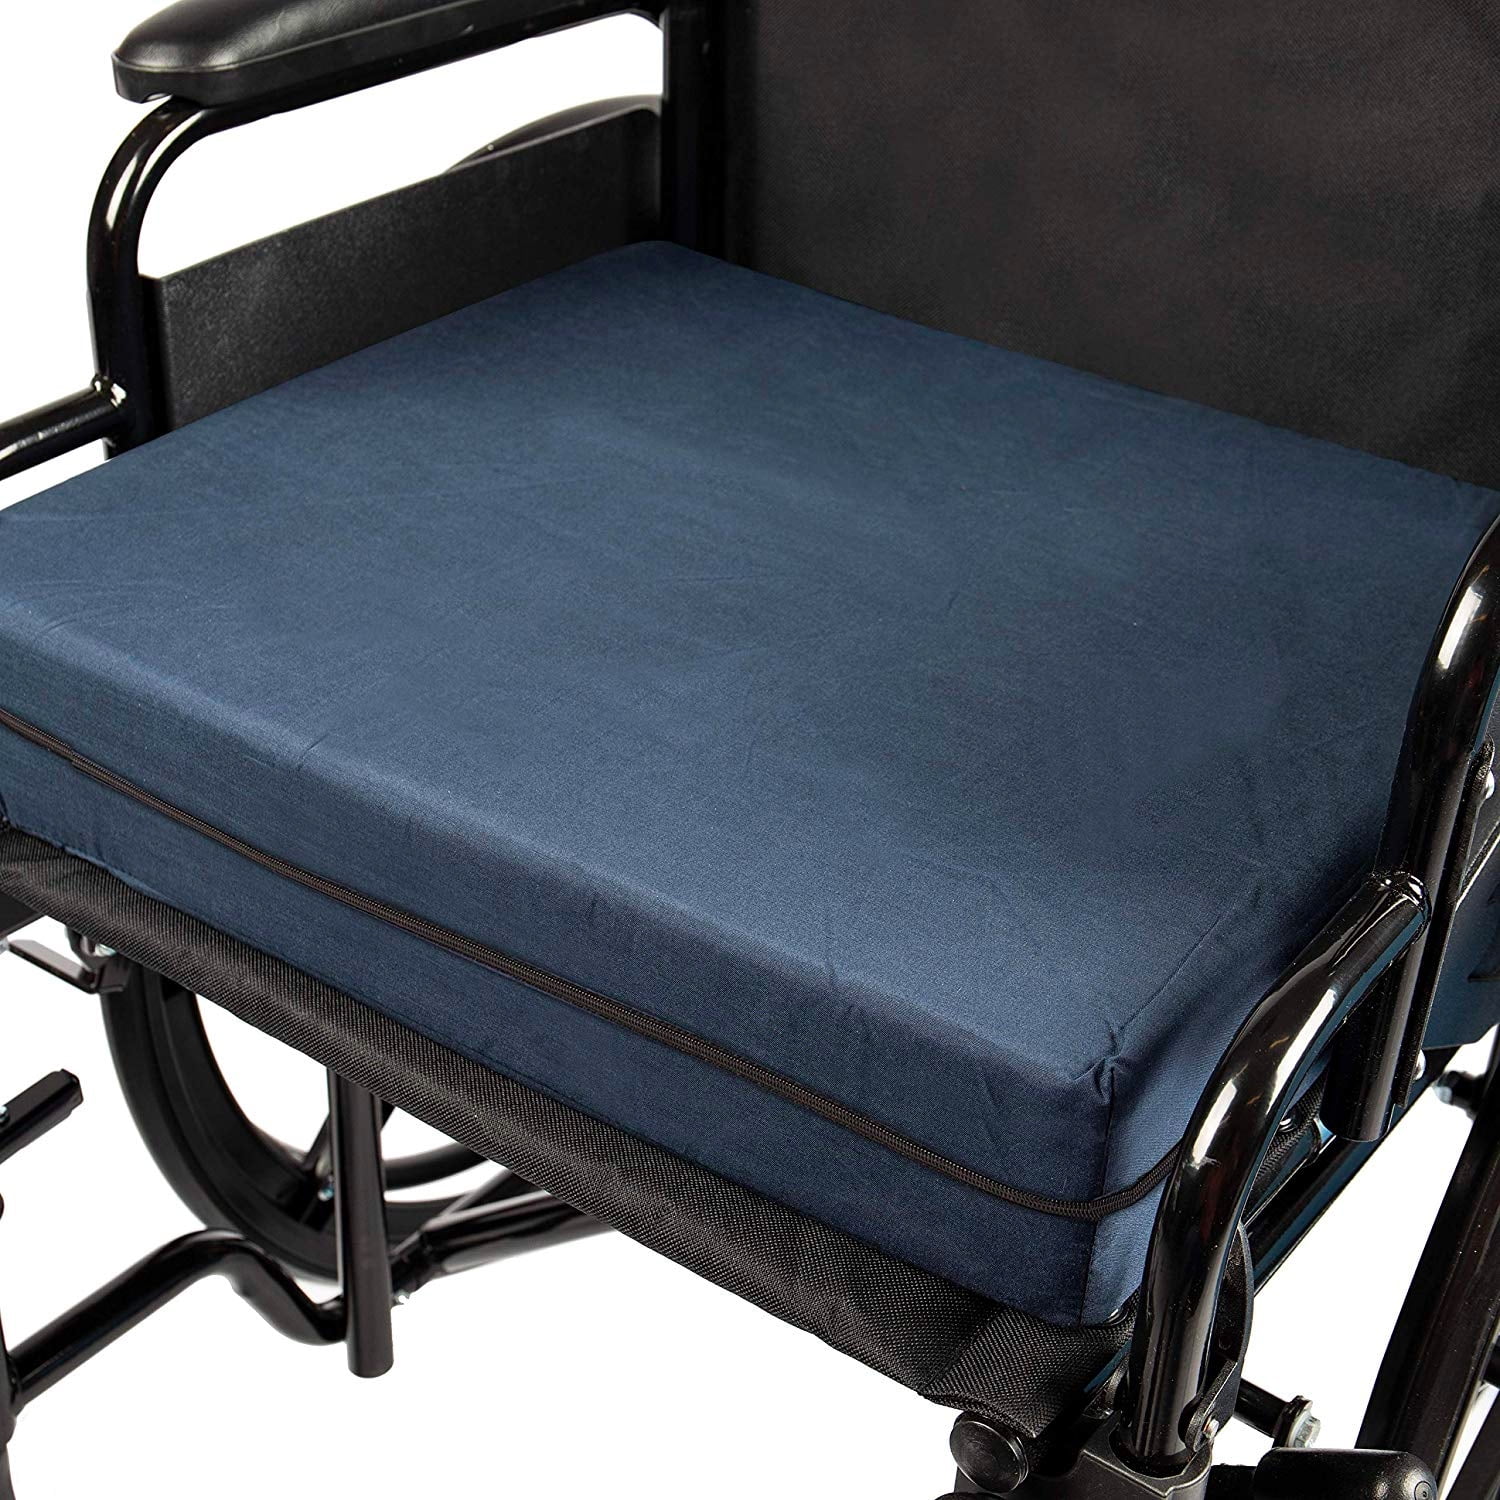 DMI Deluxe Seat-Lift Cushion 513-8884-0200 - The Home Depot